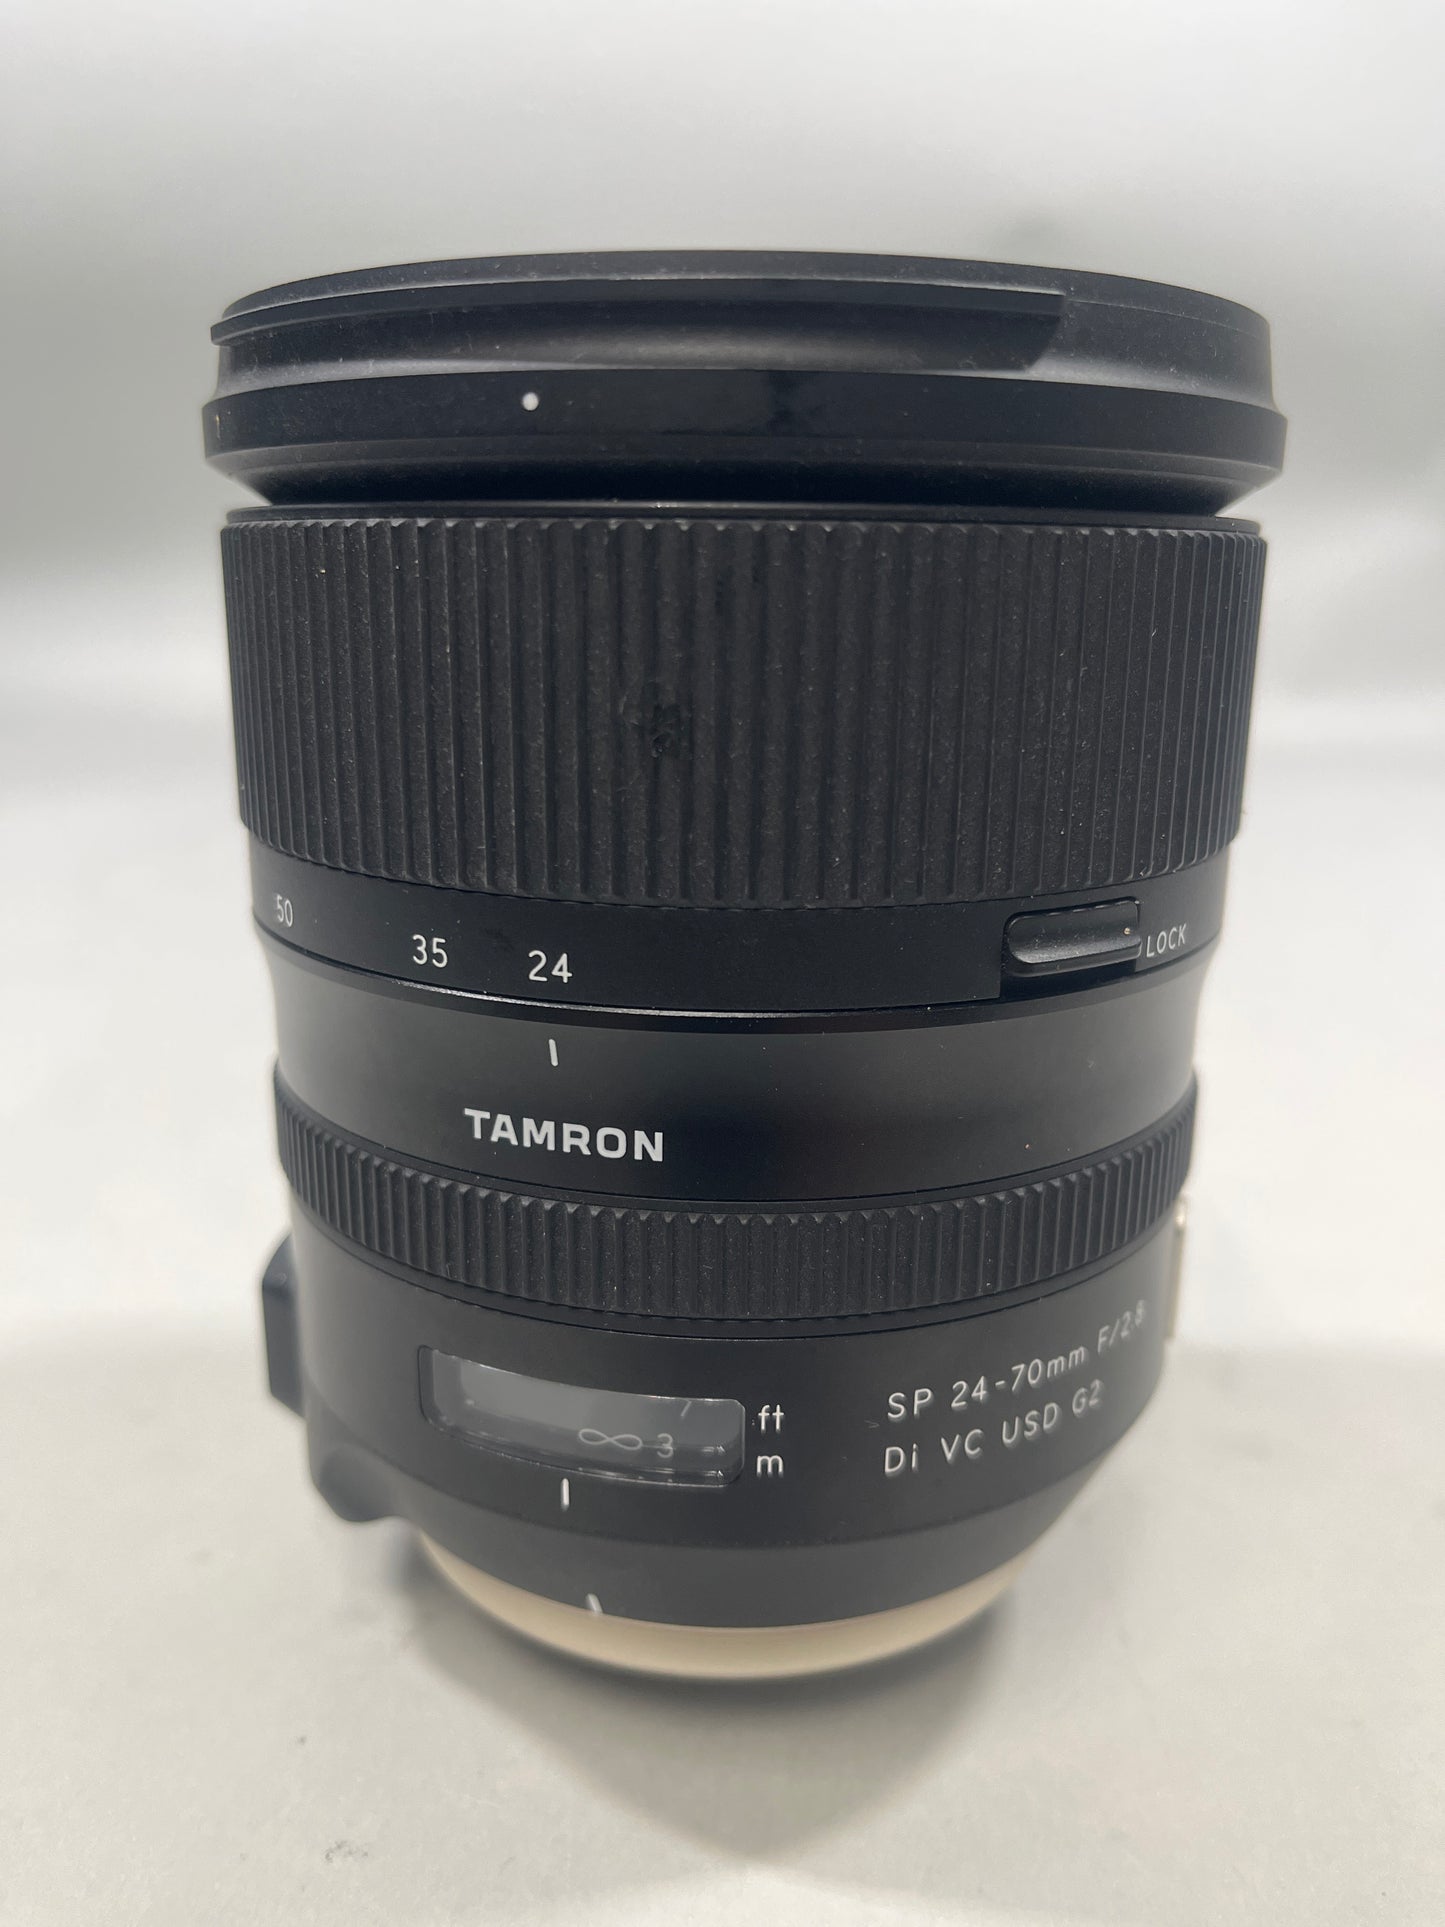 Tamron A032 Zoom Lens 24-70mm f/2.8 For Canon and Nikon Full Frame DSLR